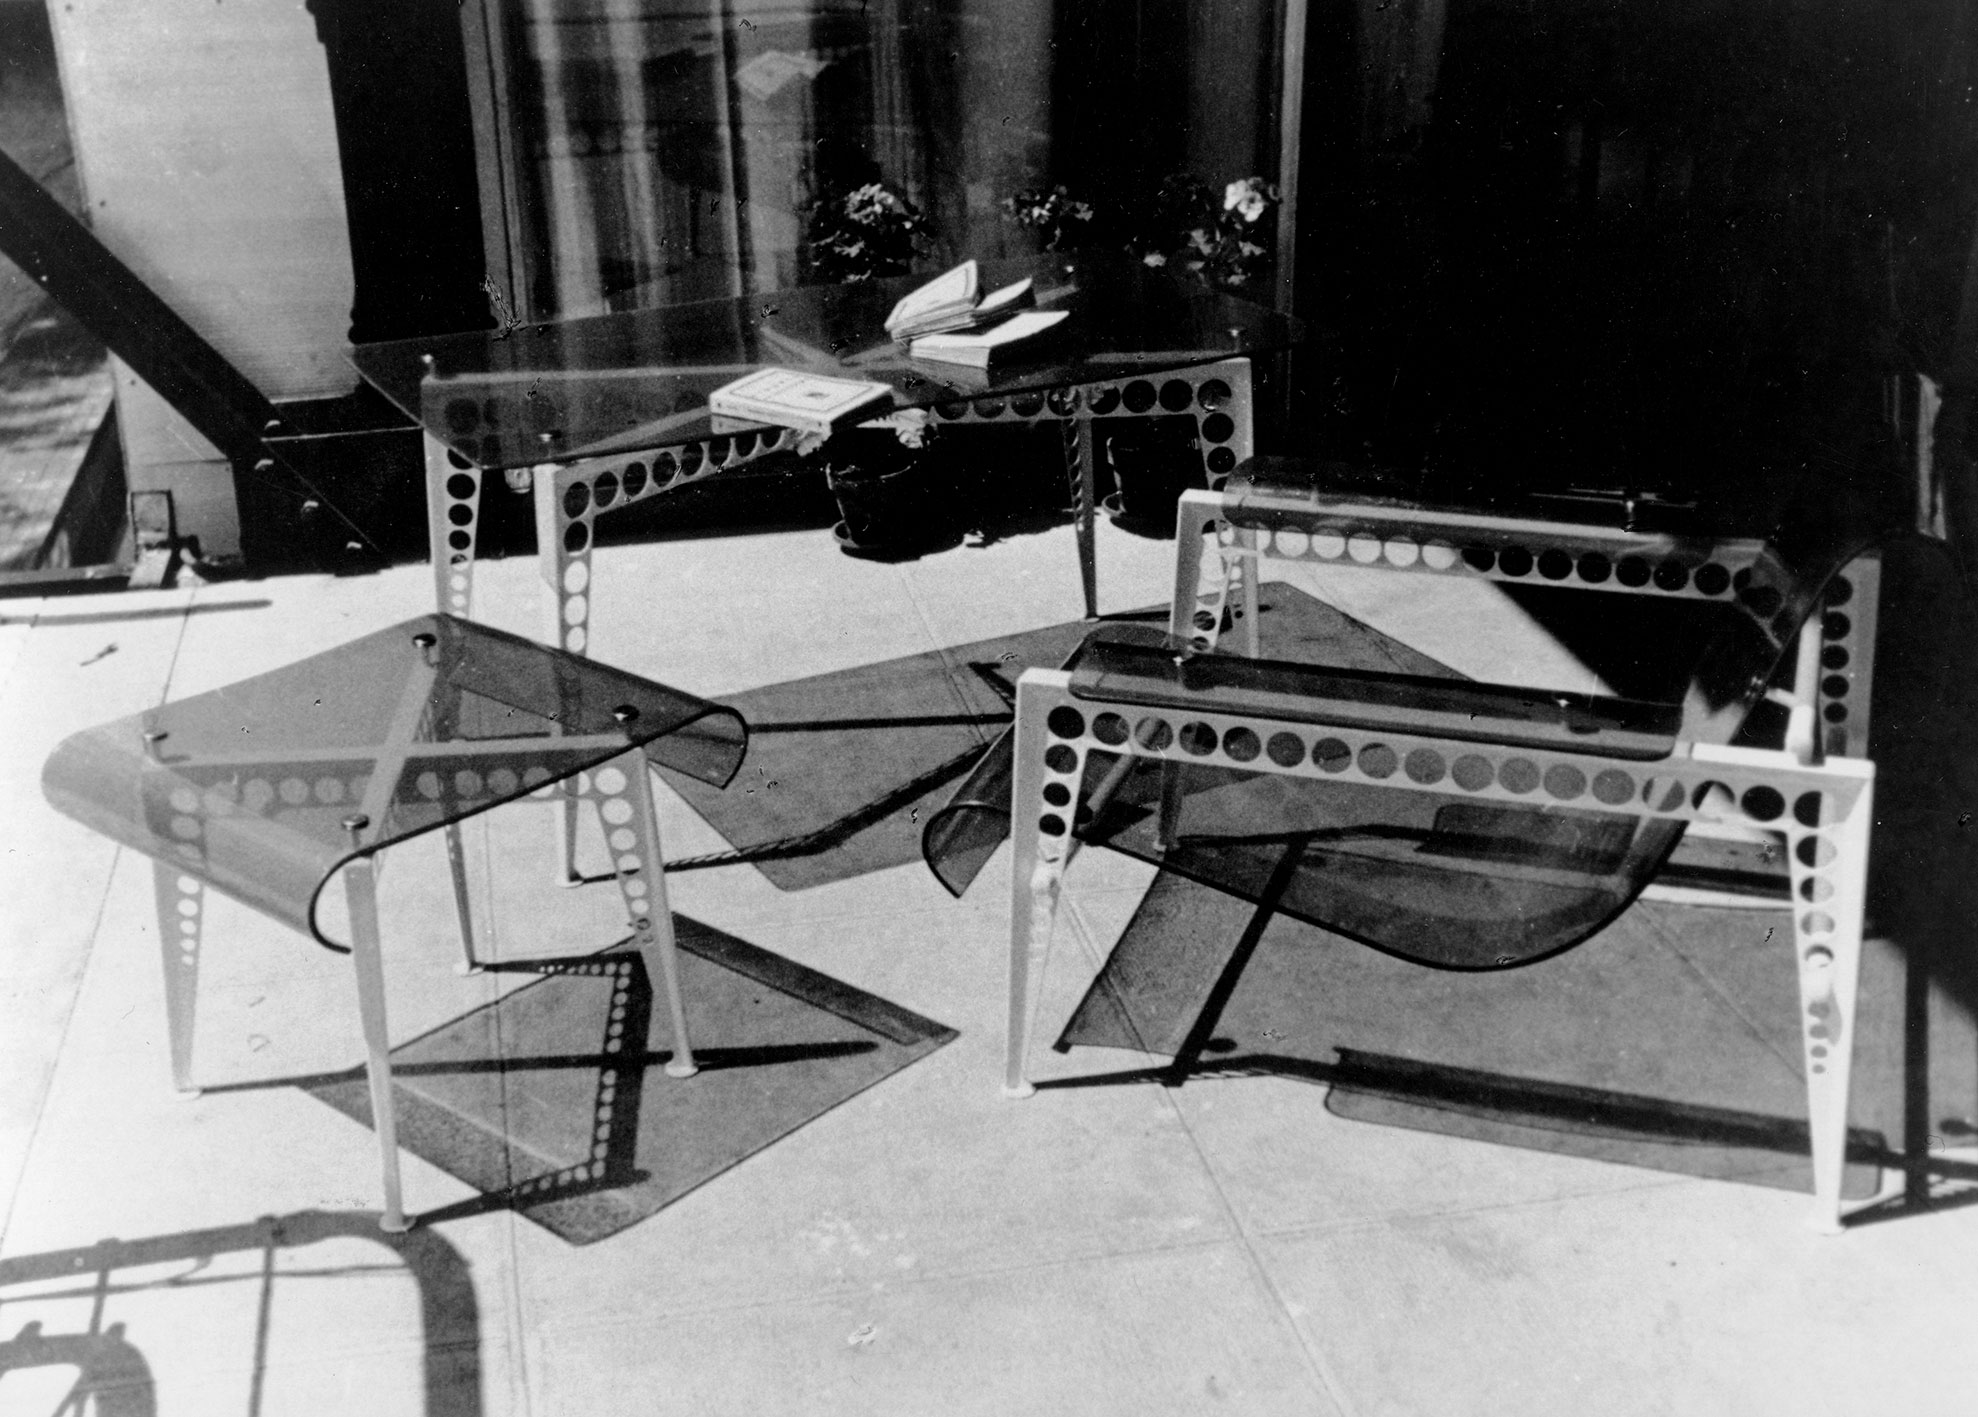 Lawn chair, stool and coffee table, 1937 with Jacques André. Presentation: Union des Artistes Modernes Exposition internationale, Paris, 1937.